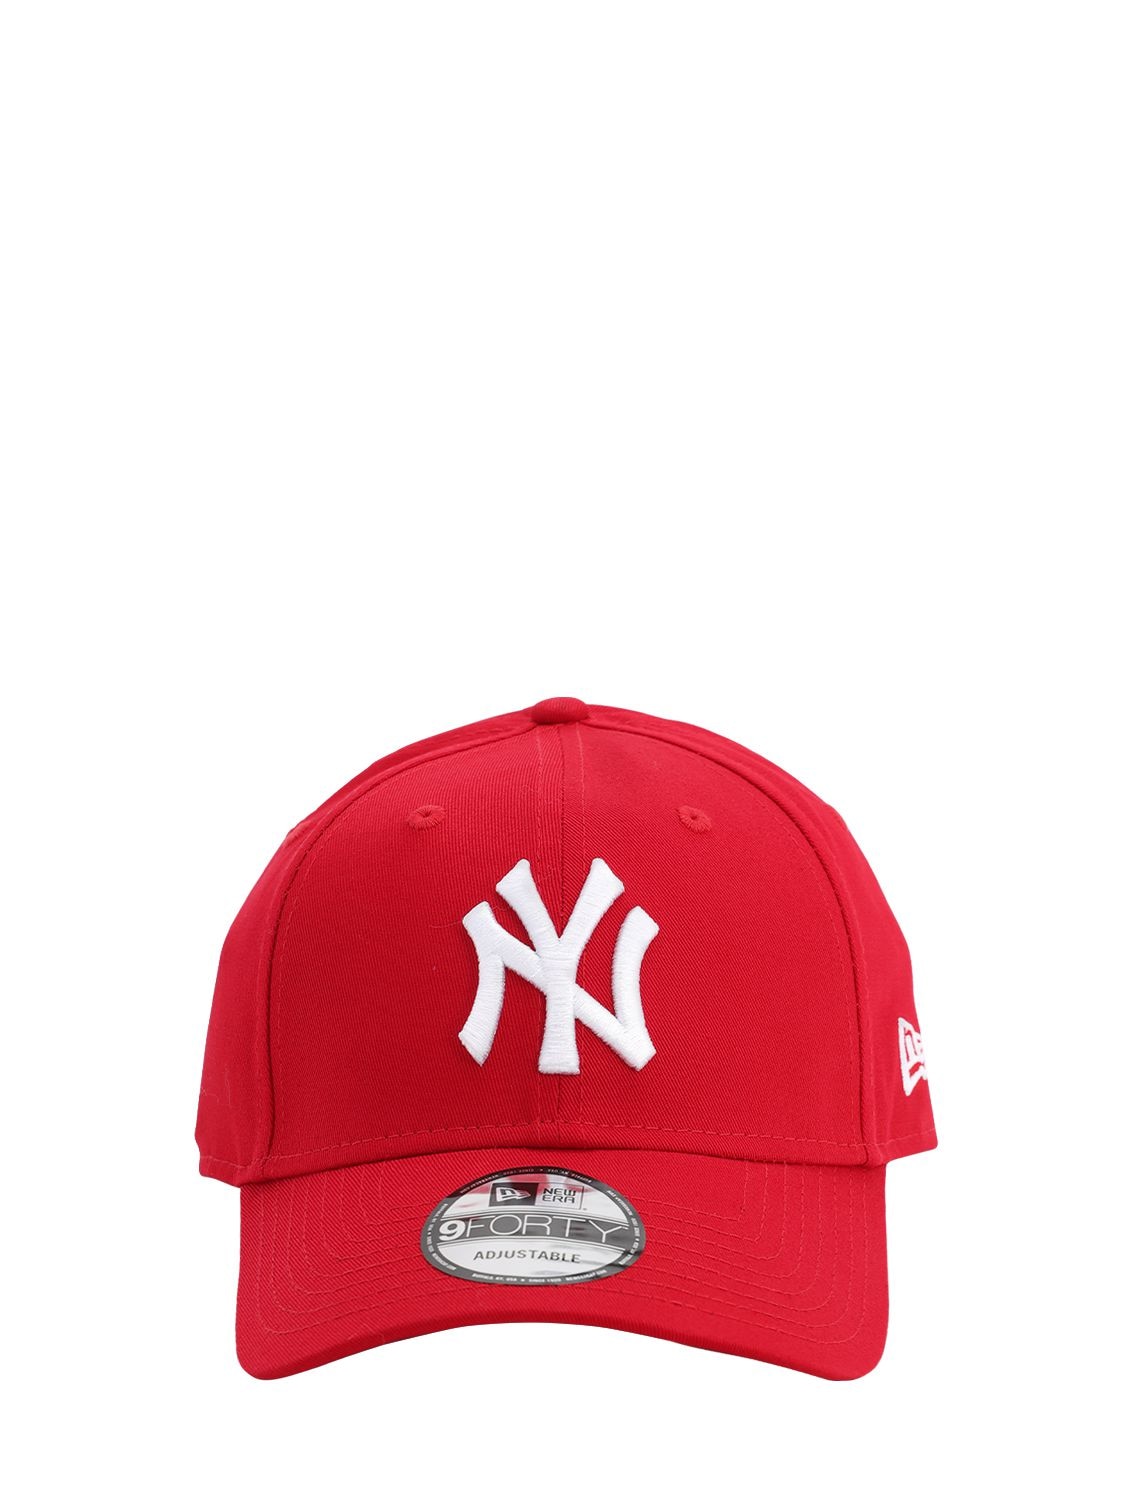 New Era Ny League 9forty Cap In Red